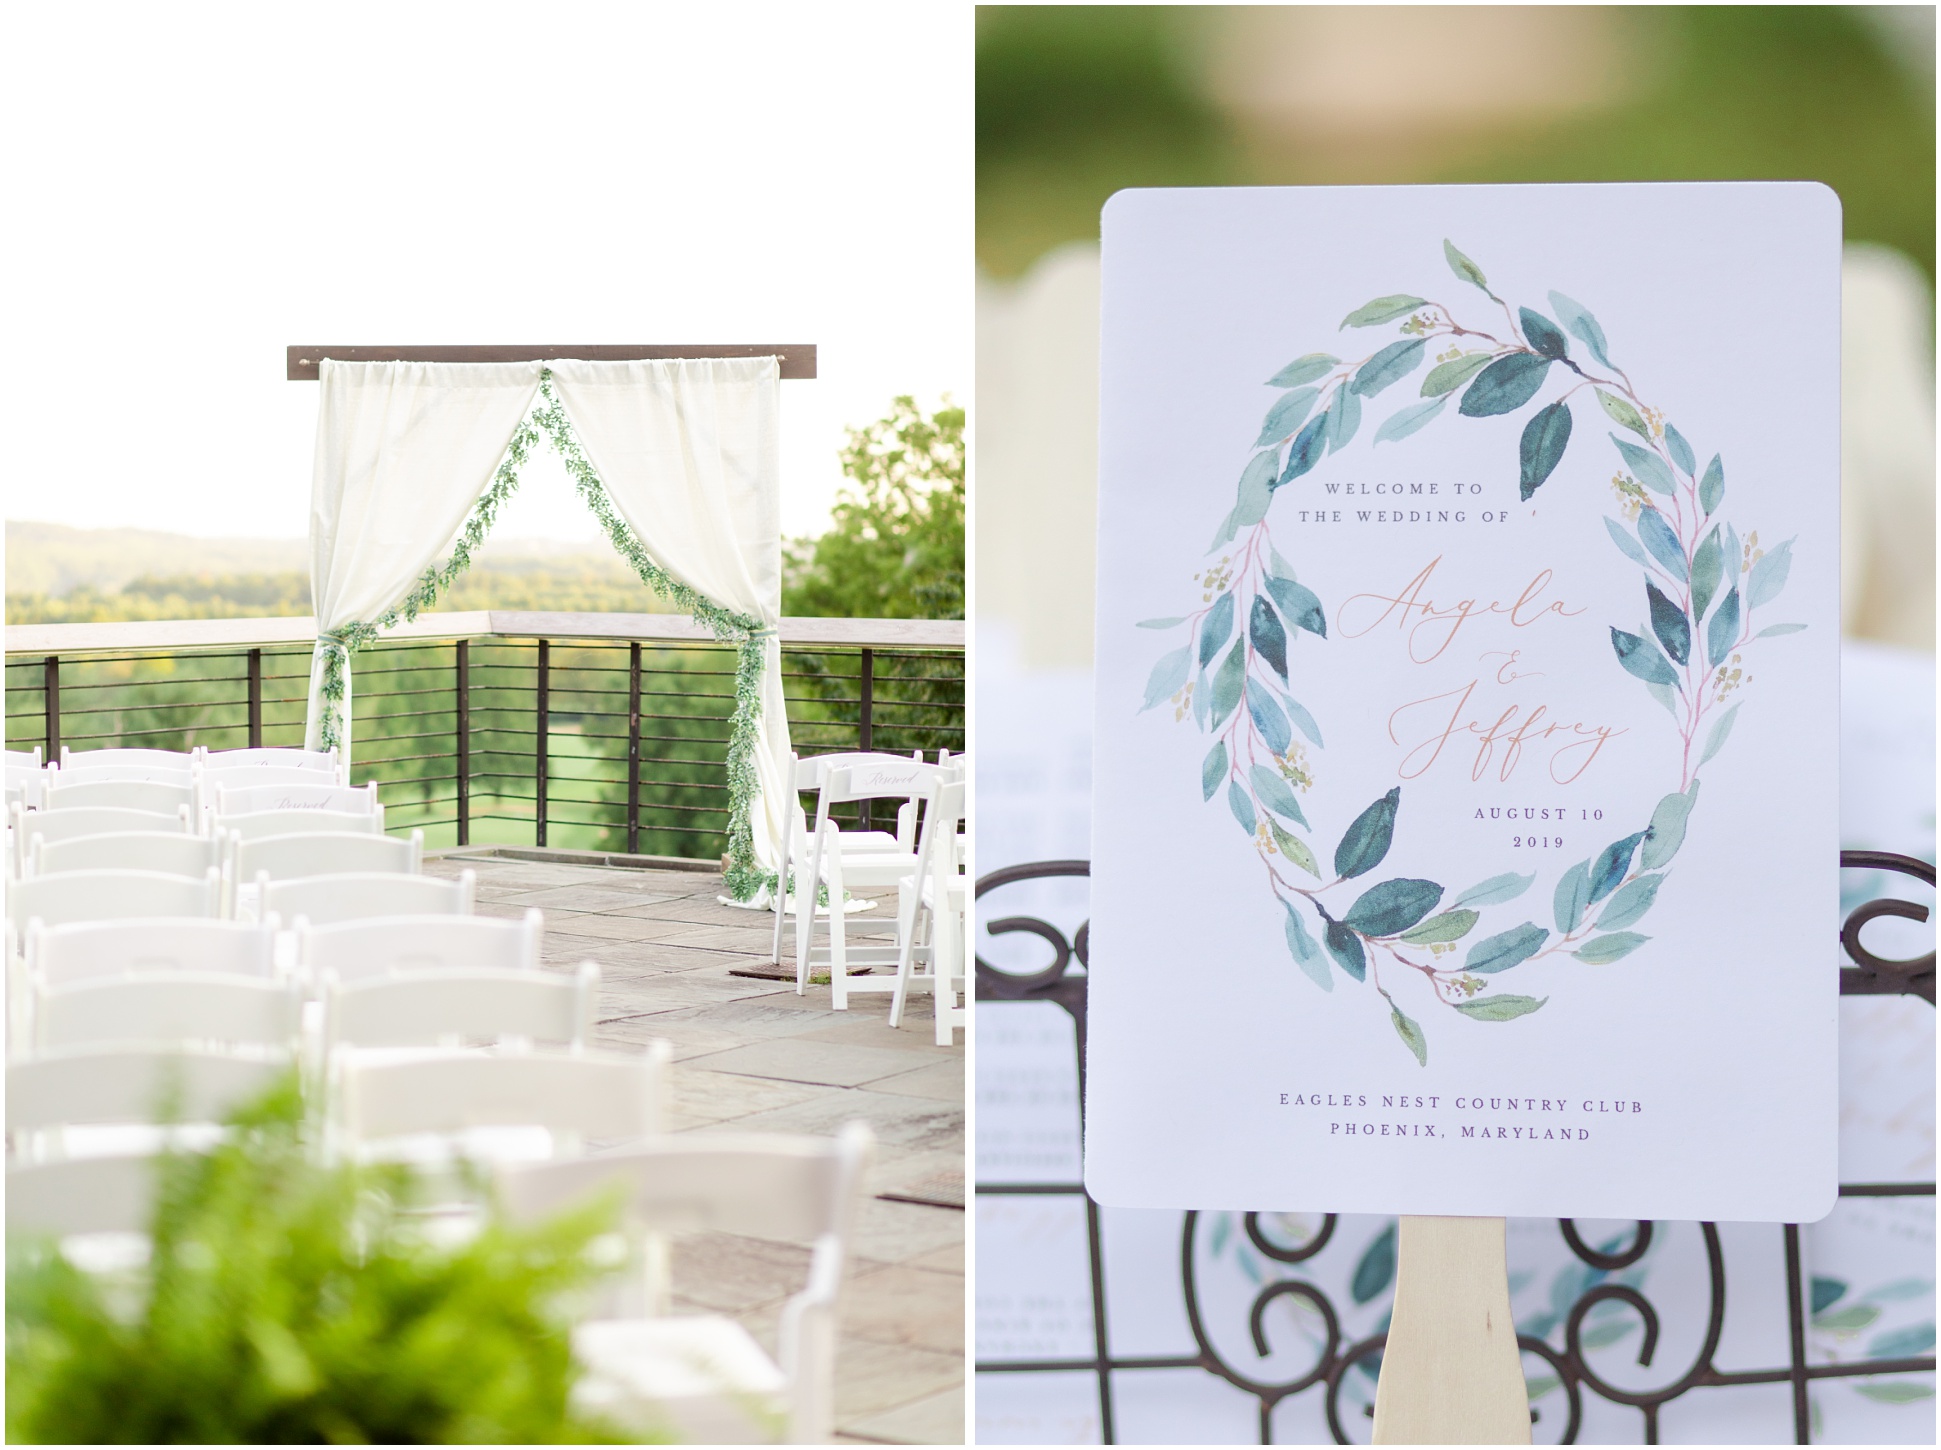 Ceremony Details at Eagles Nest Country Club